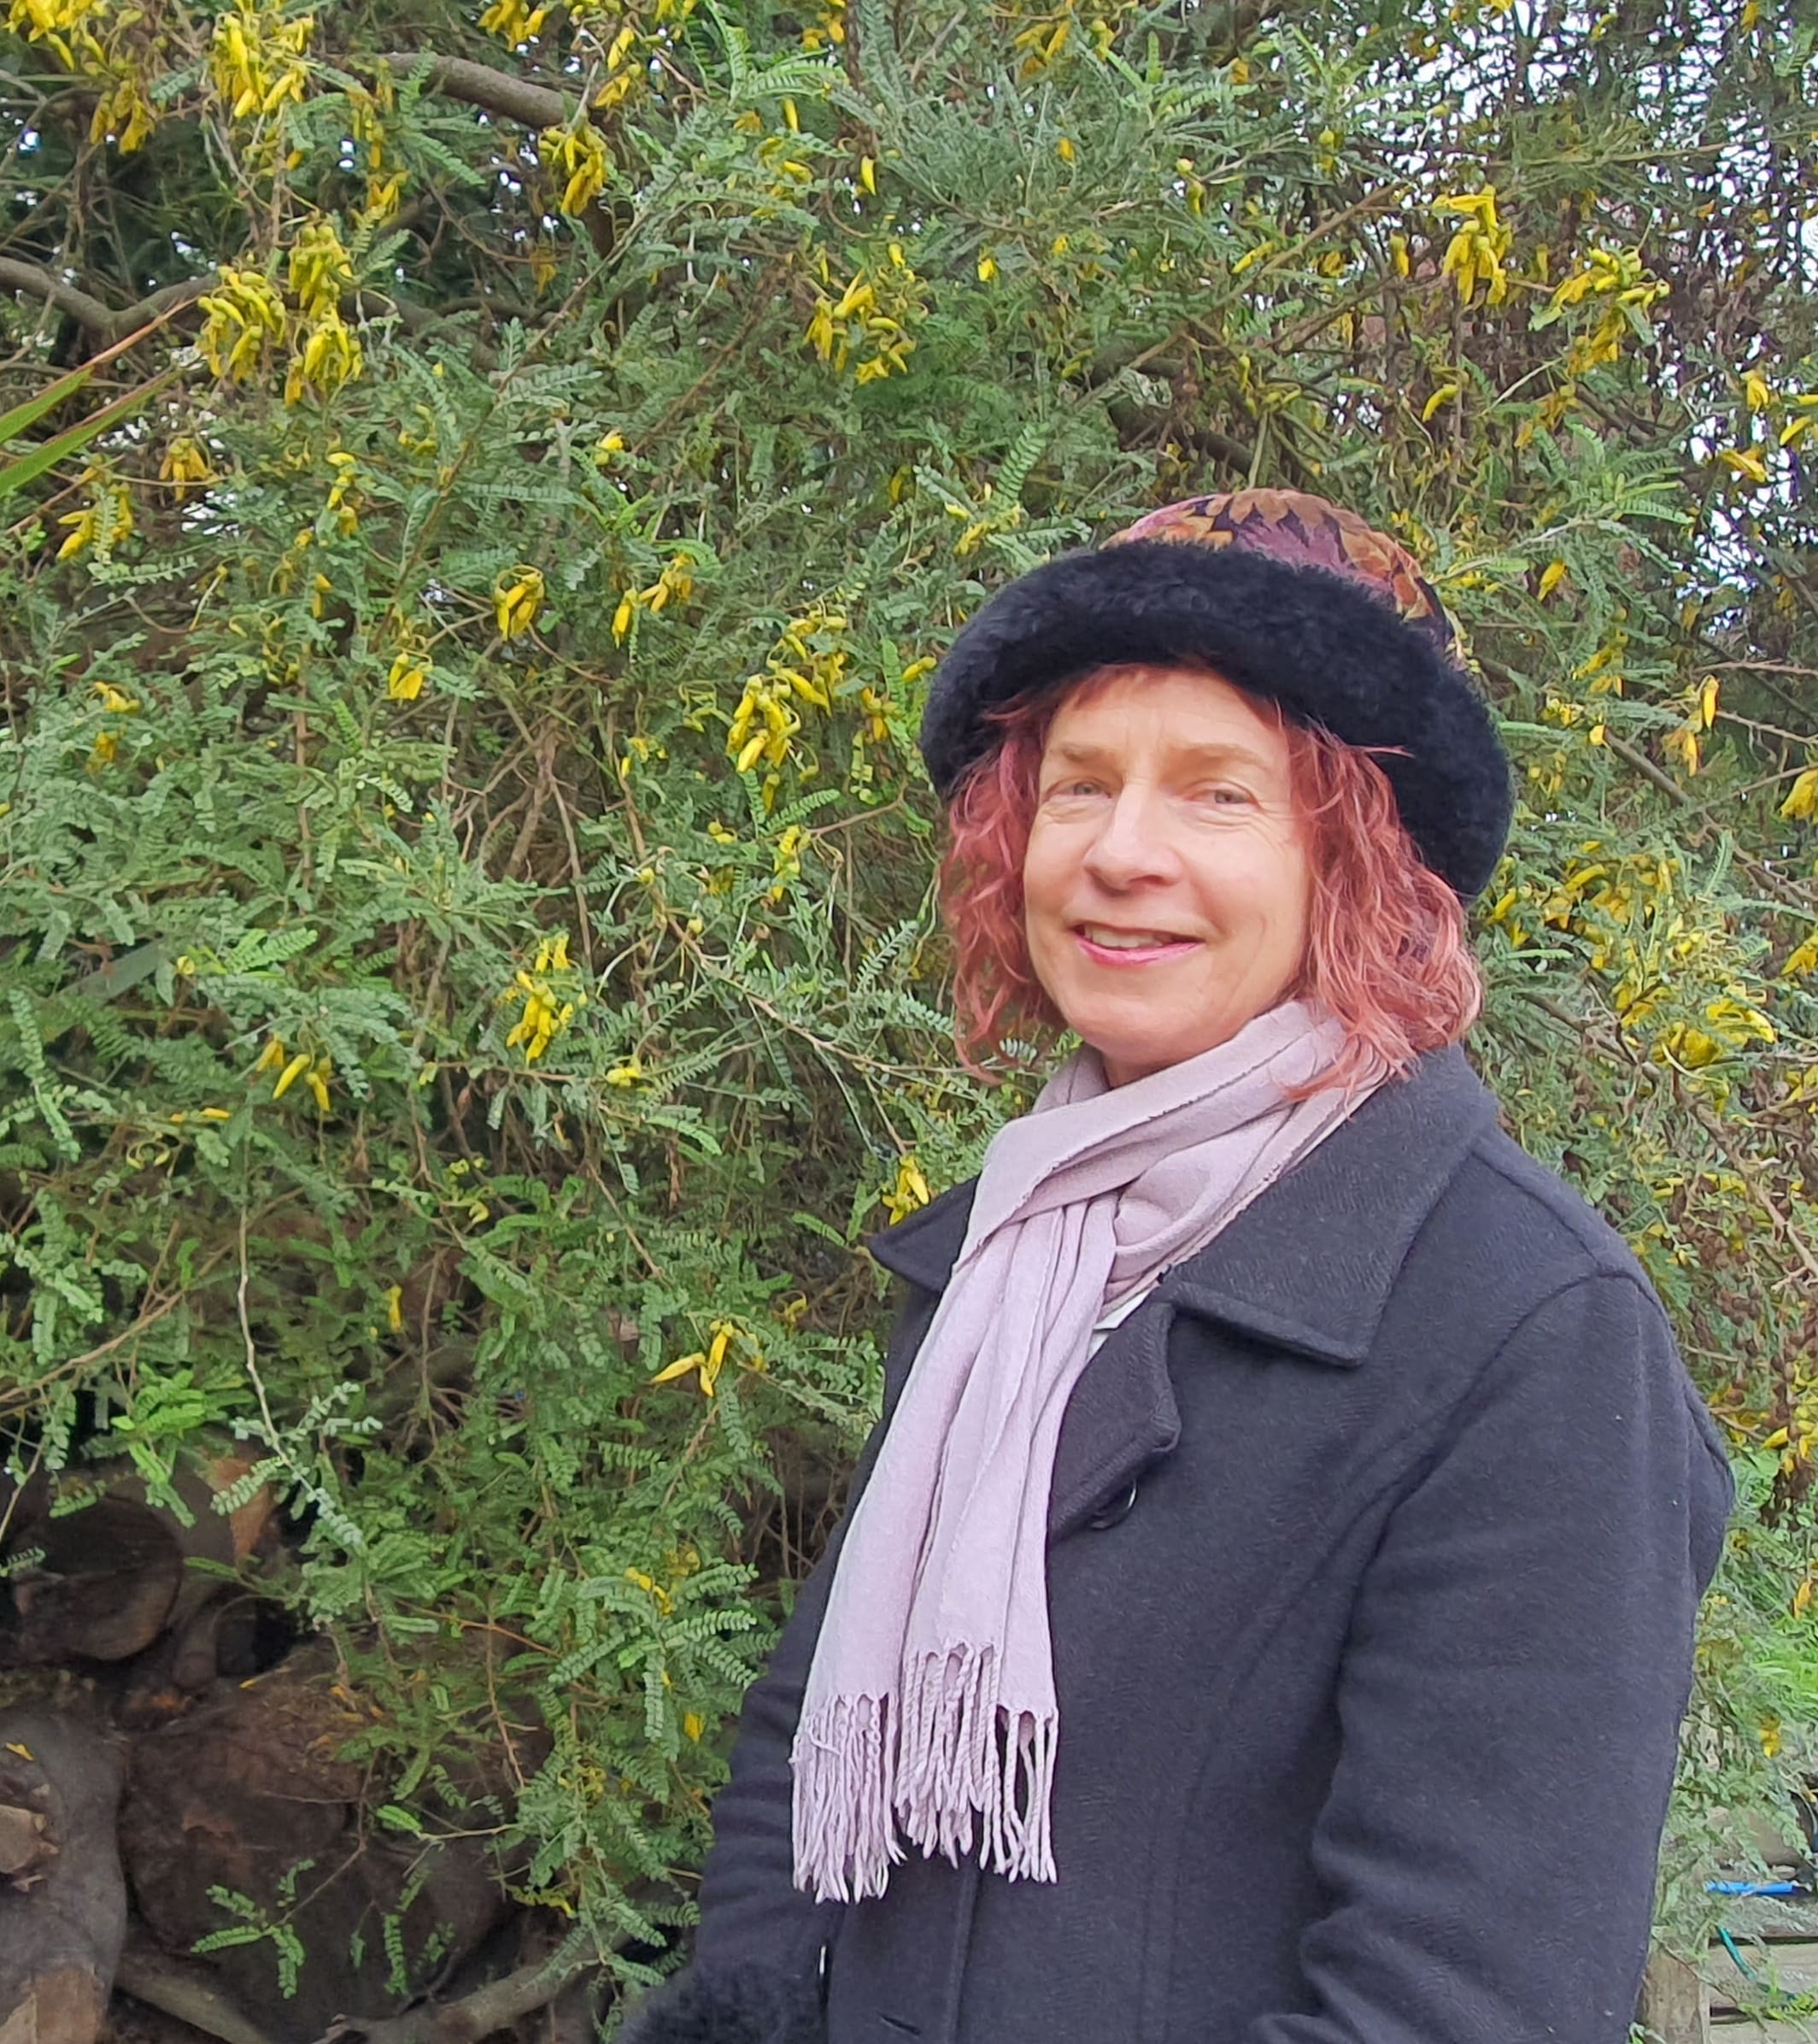 Fiona Carswell with her early flowering kowhai tree that attracts many bellbirds.